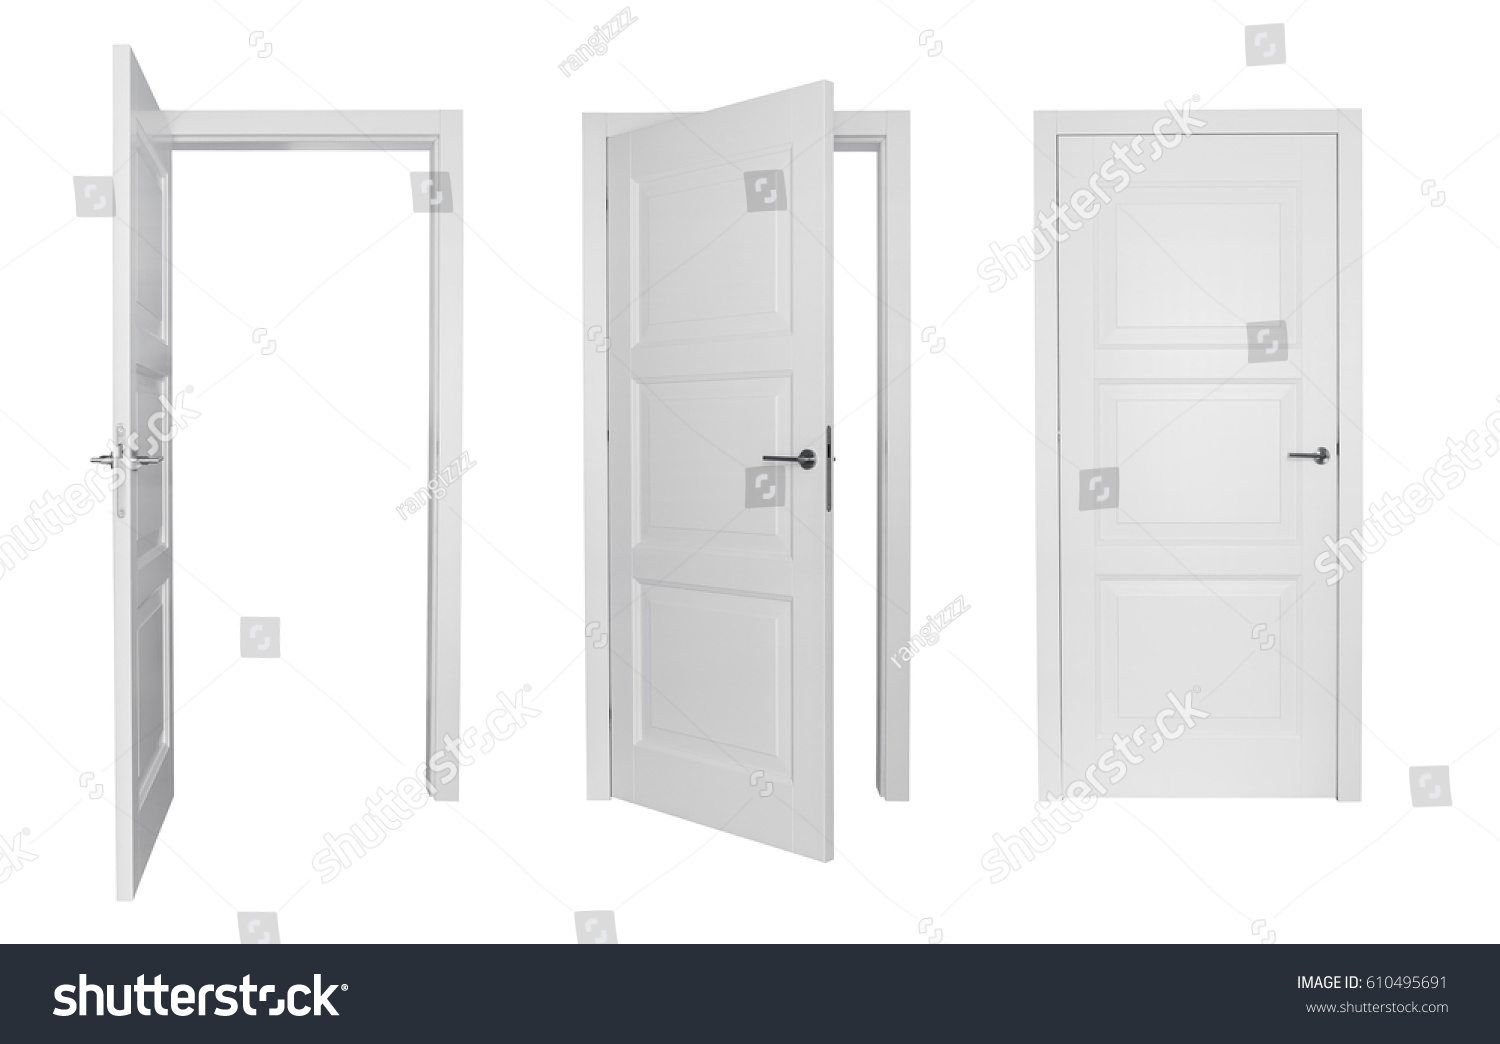 Set of different white door isolated on white background